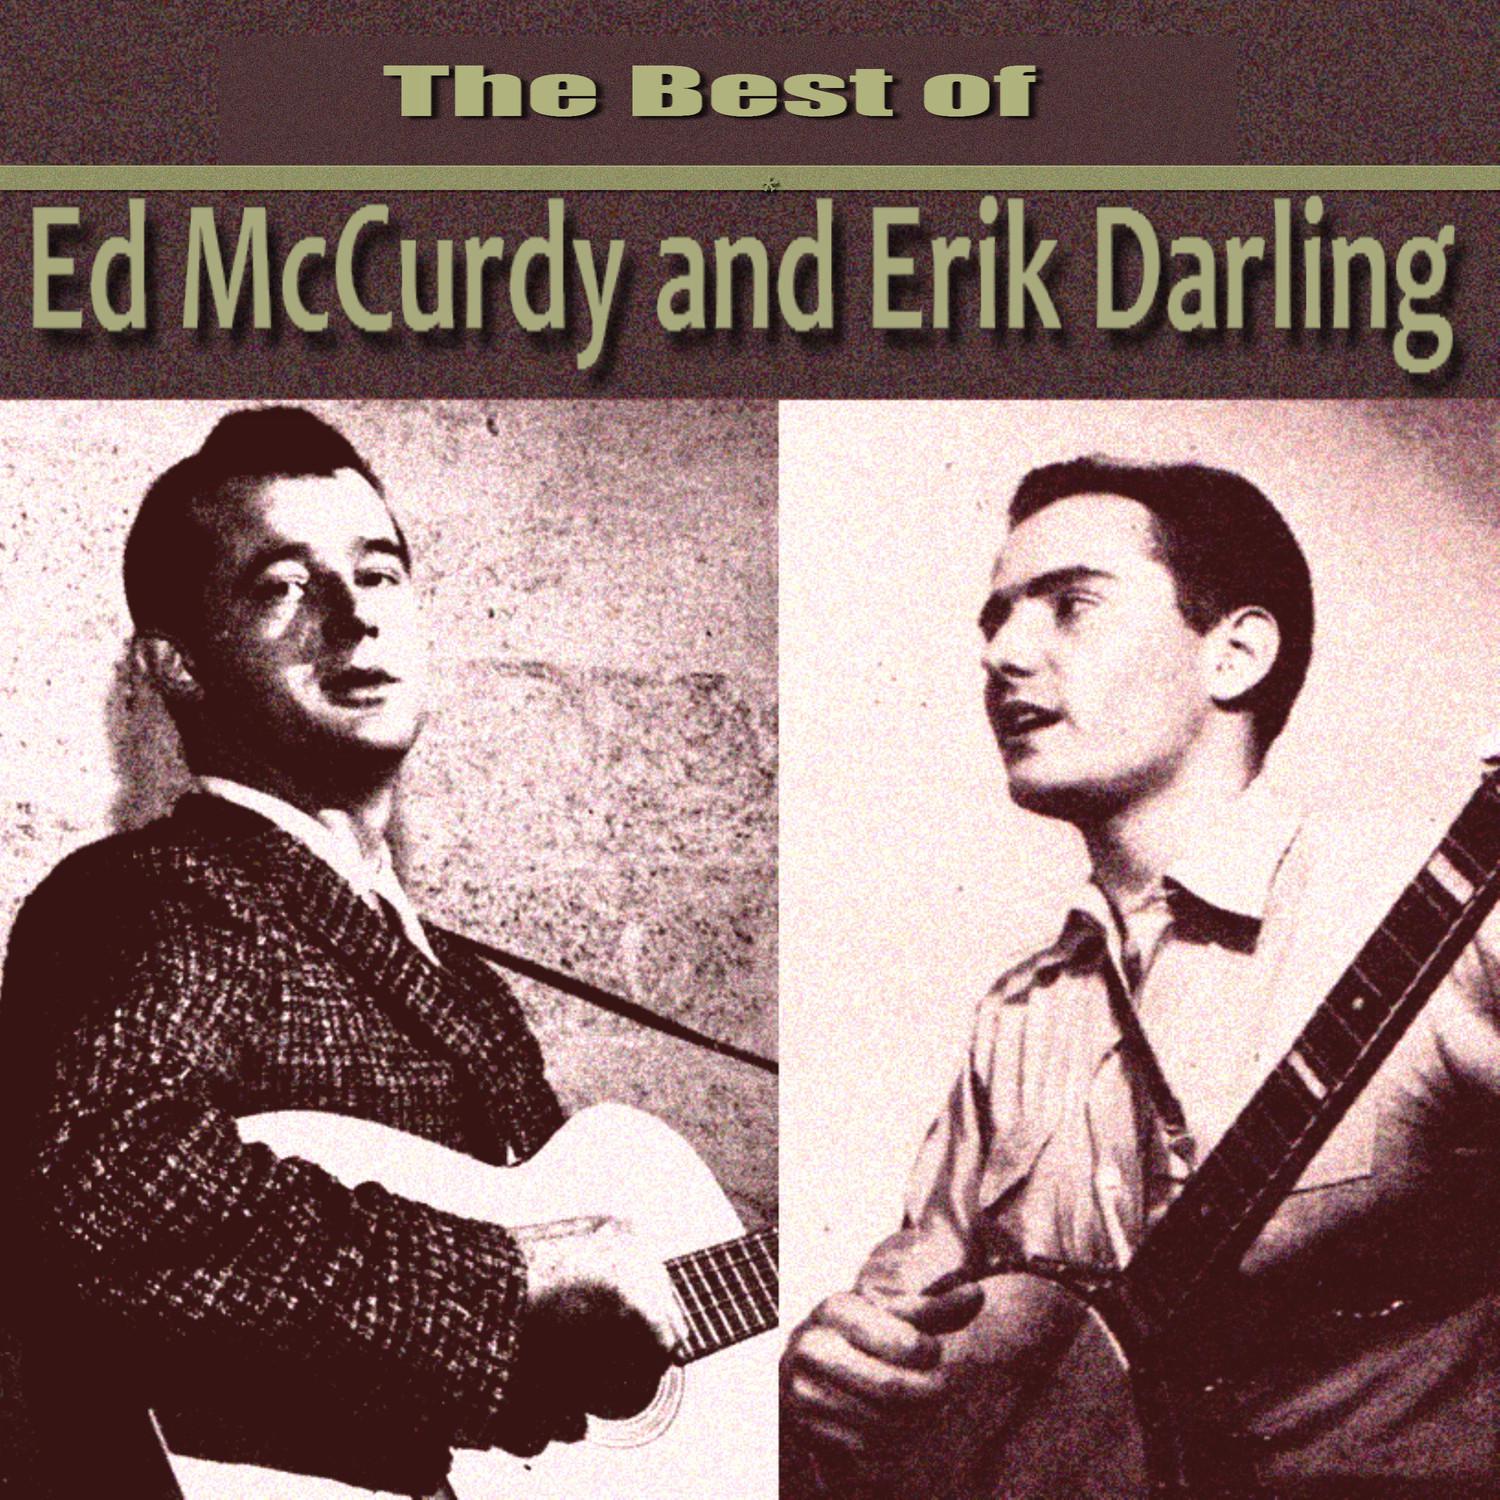 The Best of Ed McCurdy and Erik Darling